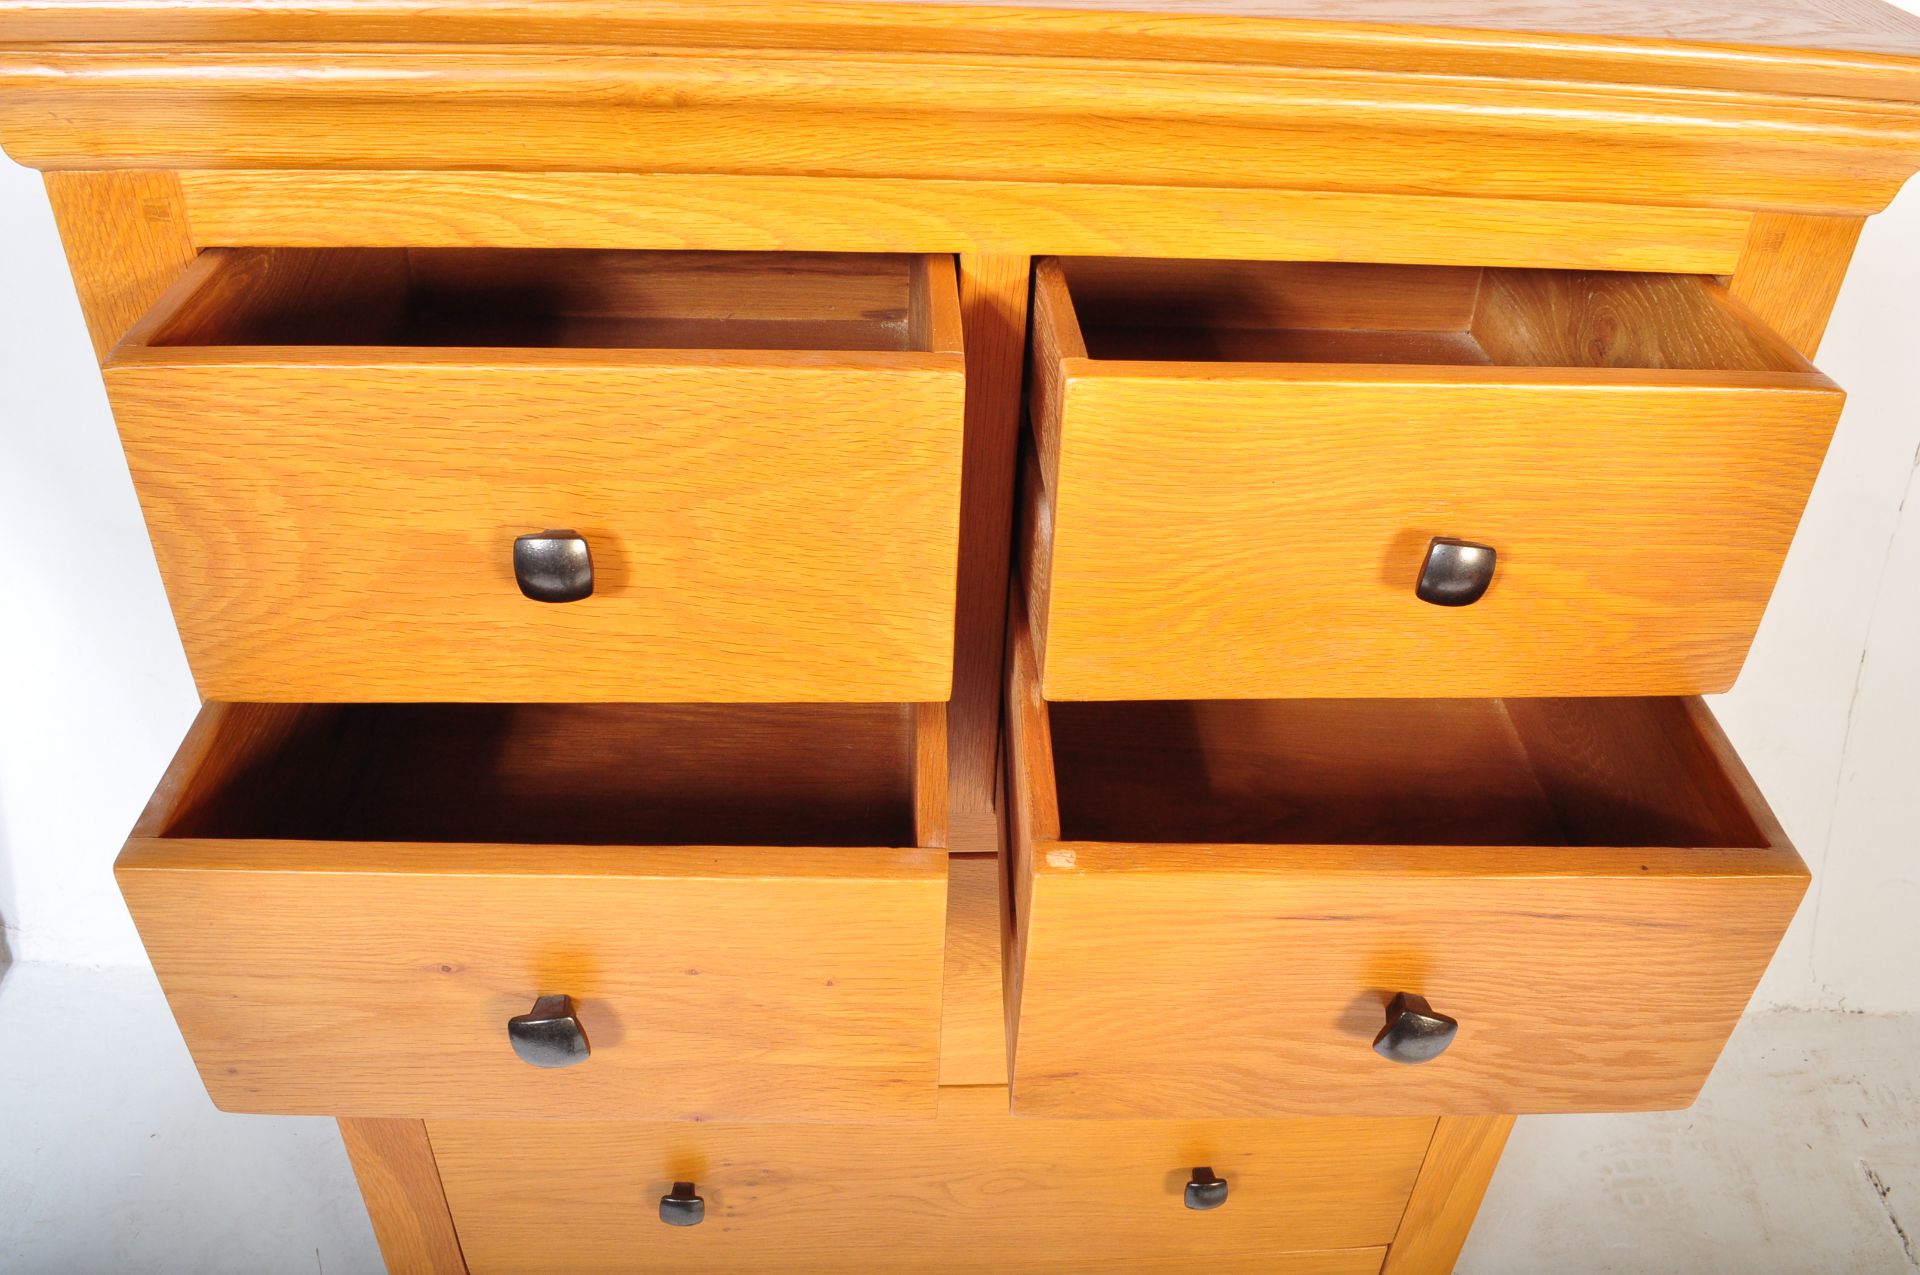 CONTEMPORARY OAK FURNITURE LAND CHEST OF DRAWERS - Image 4 of 5